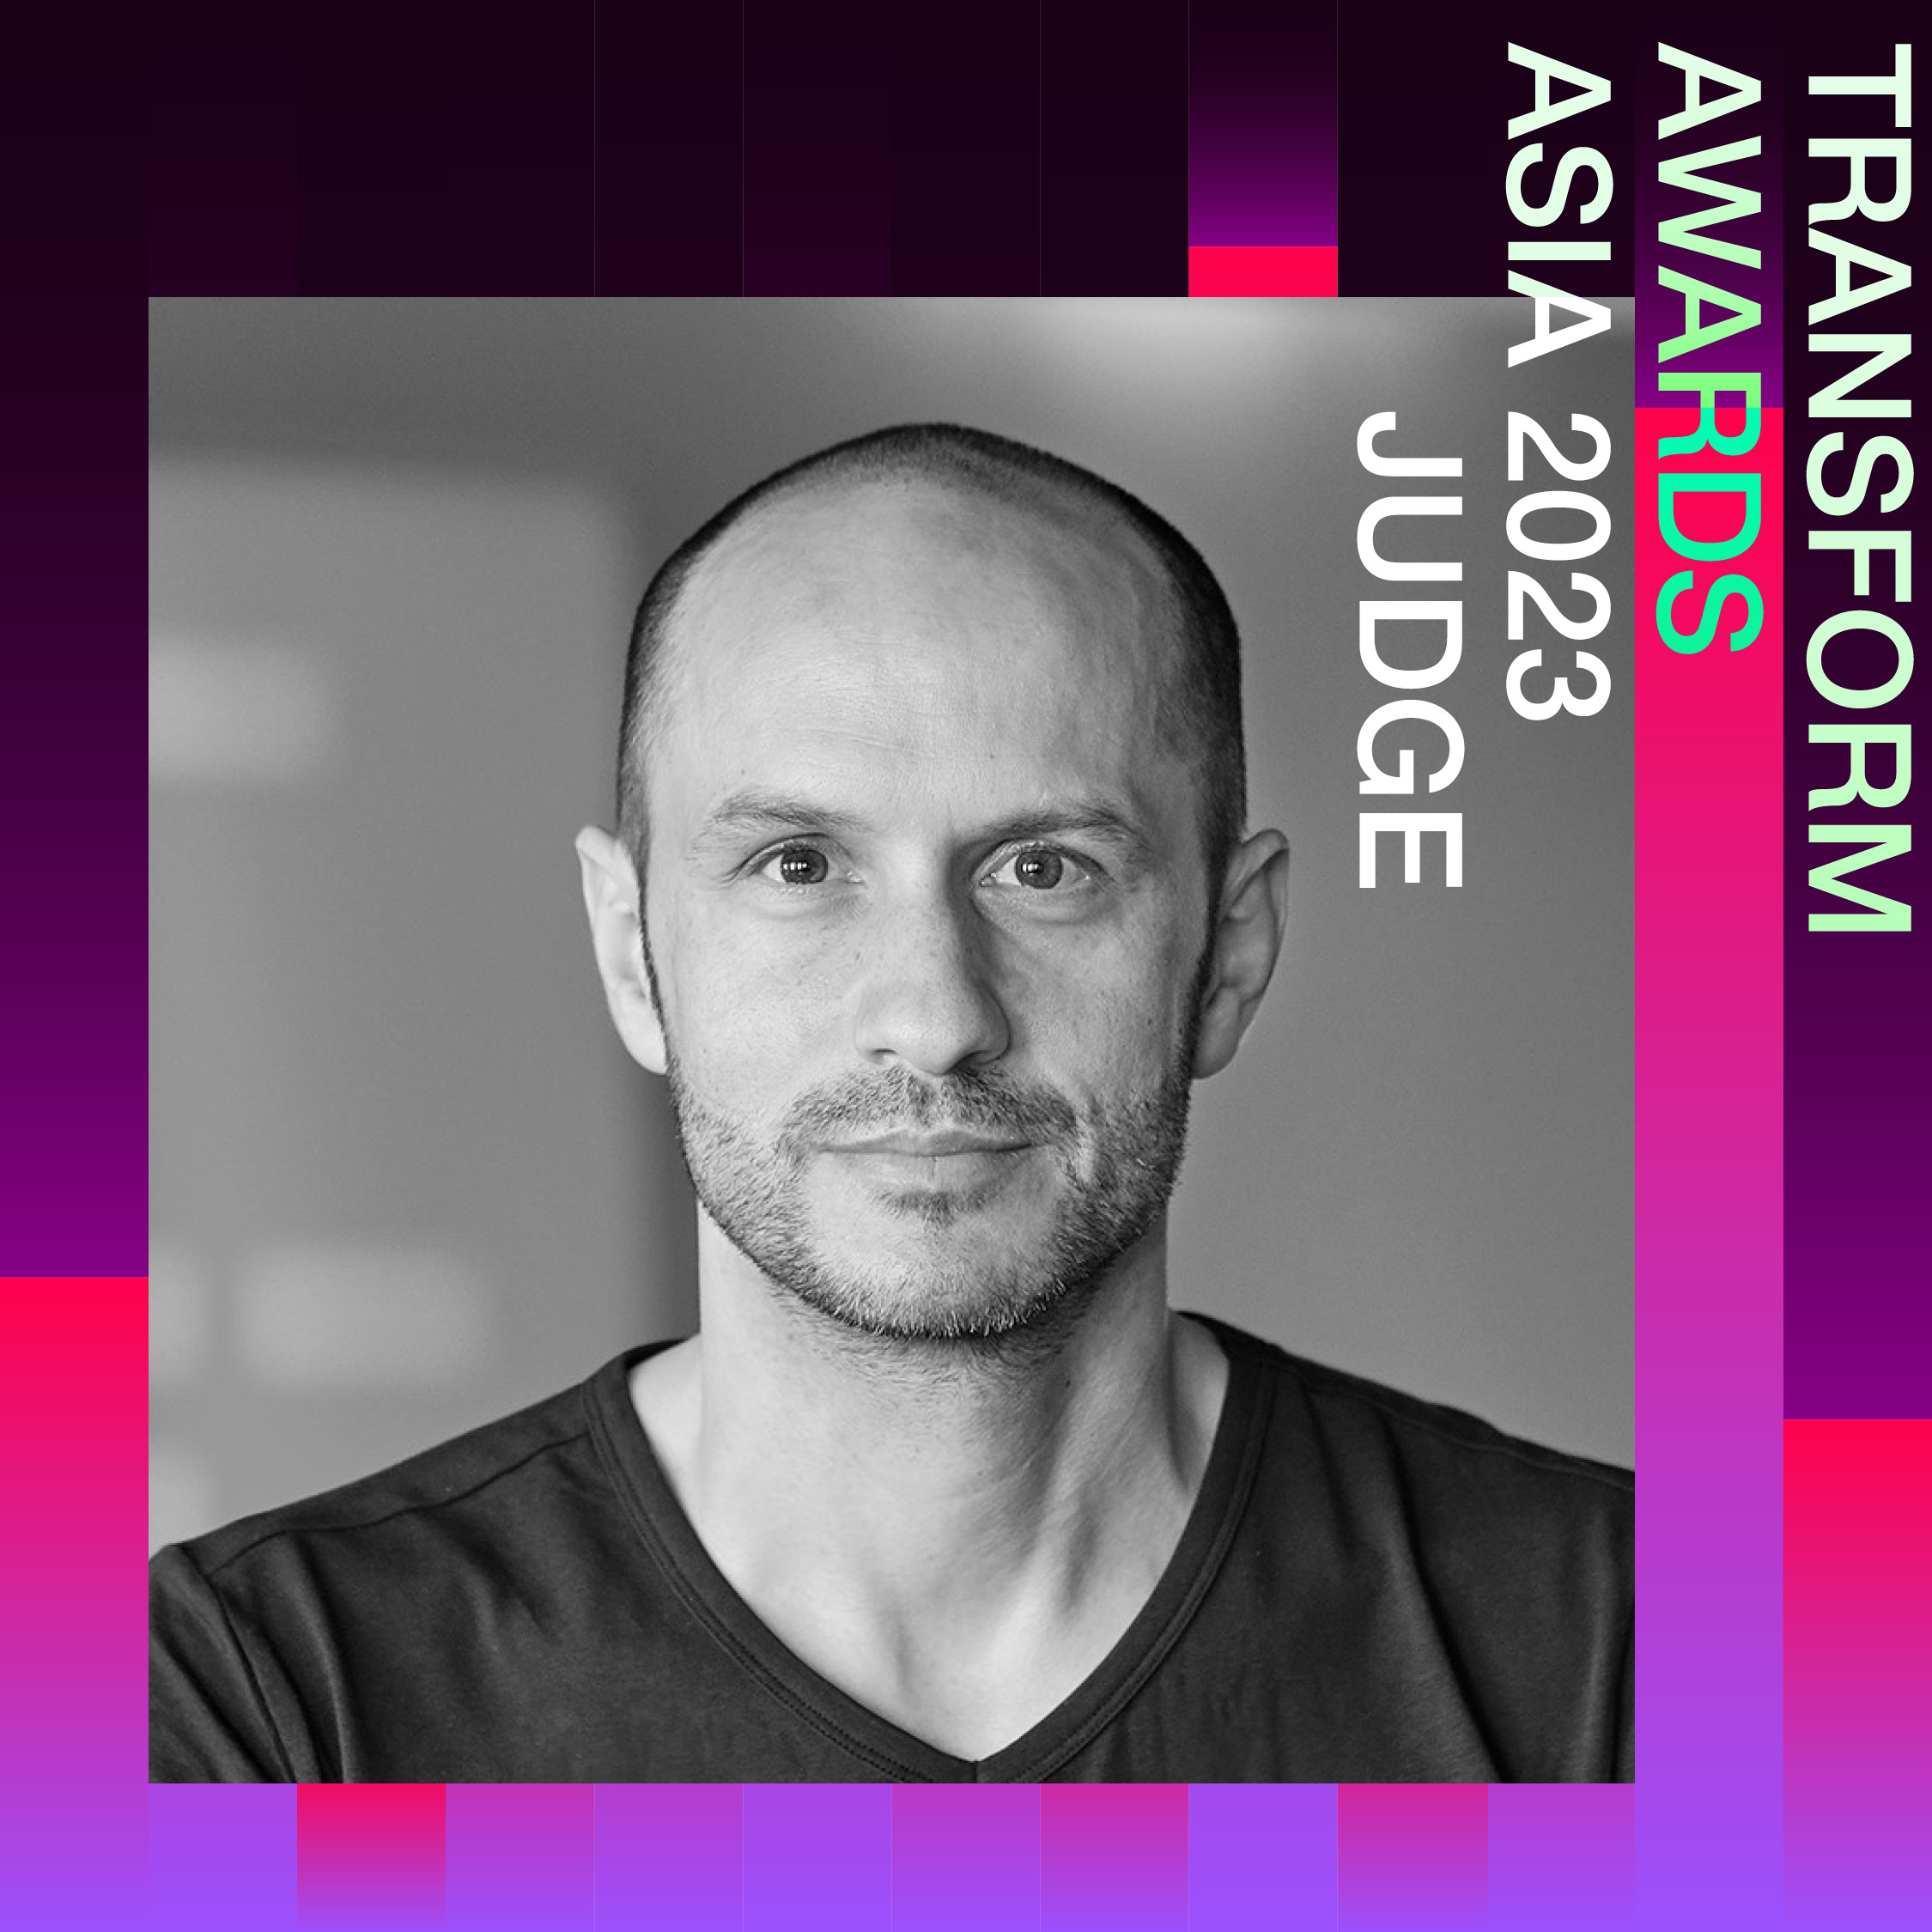 Further news which make us proud: Cornelius Ringe will judge the audio branding category of the Transform Awards Asia 2023.🚀